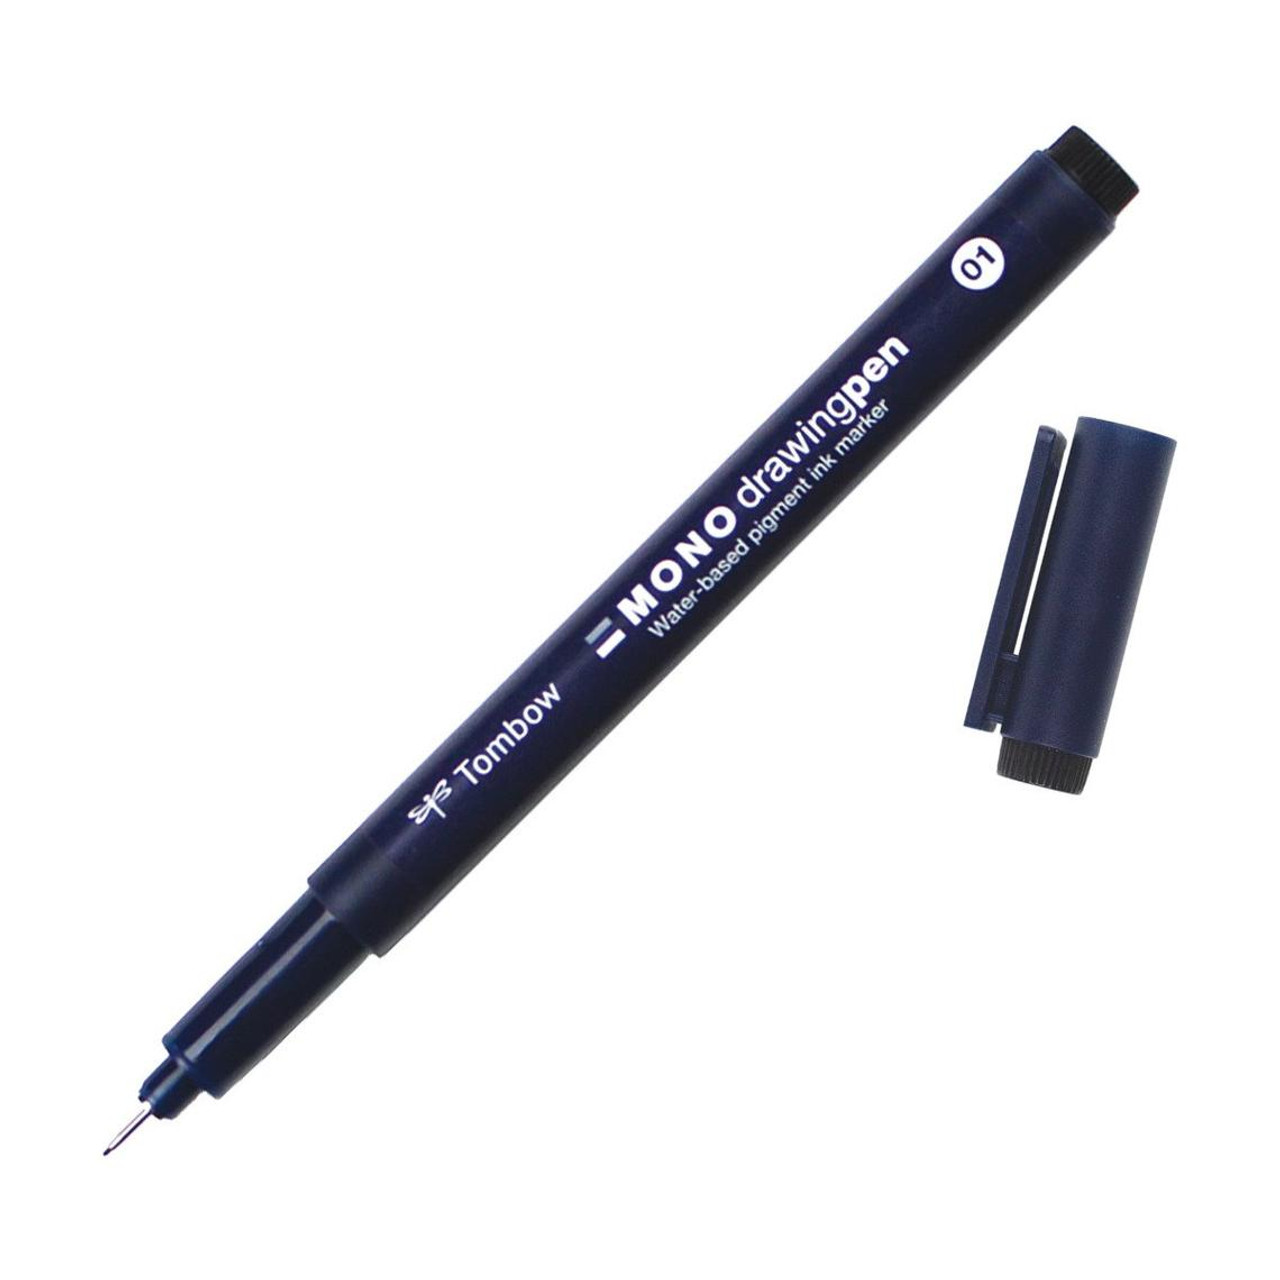 Set of Tombow MONO Drawing Pens, 0.1mm, 0.3mm, and 0.5mm Tip - Great for Bible Journaling!